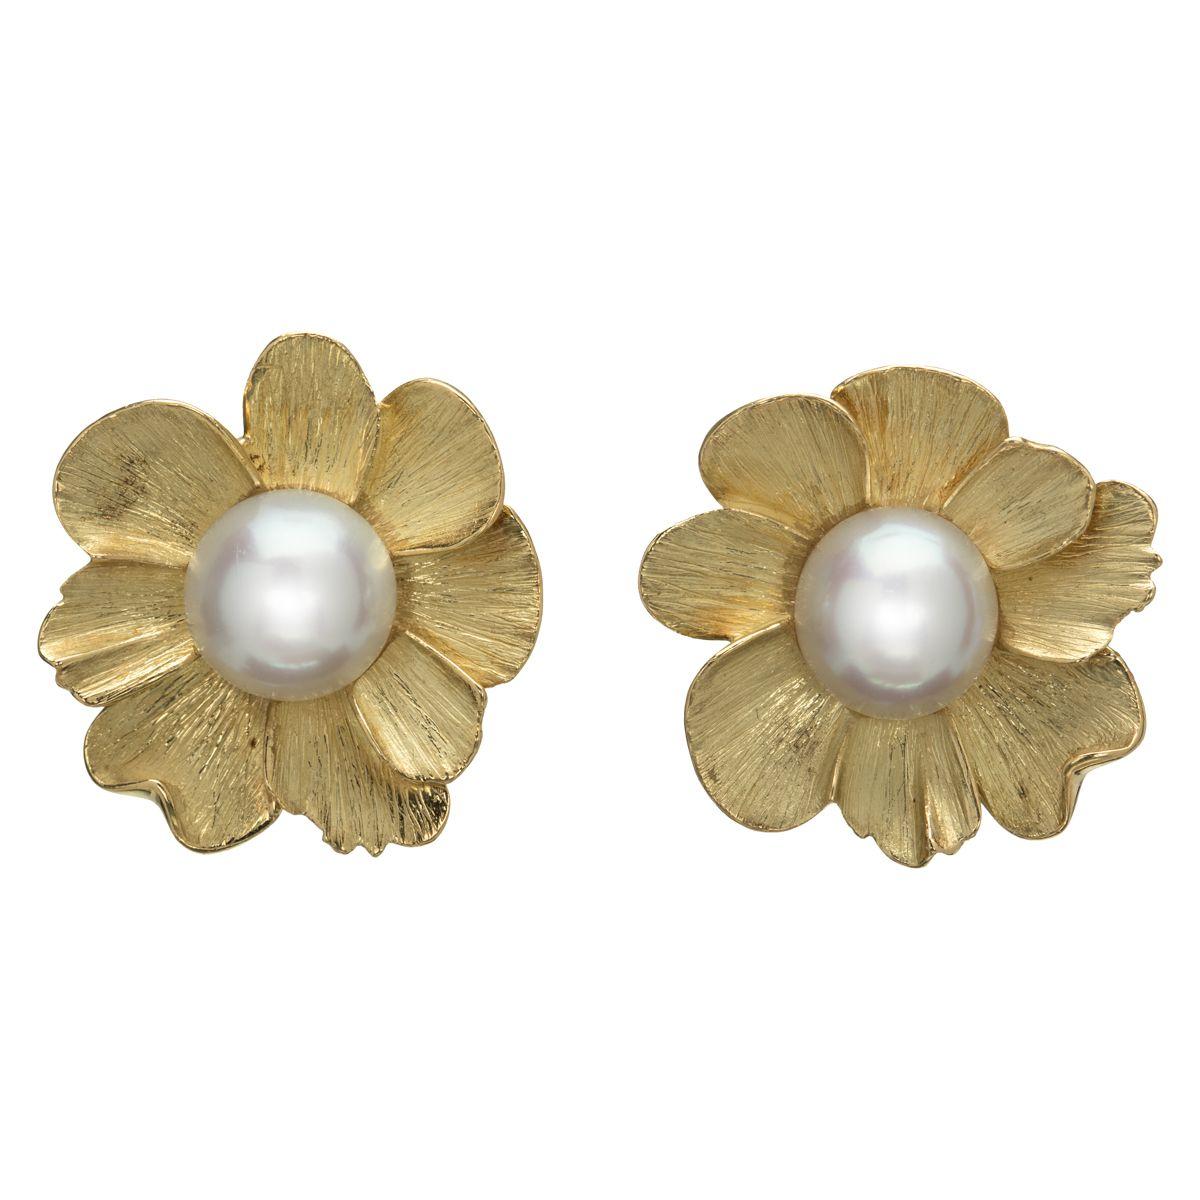 Contemporary 18k Yellow Gold Flower Earrings with White South Sea Pearls, by Gloria Bass For Sale